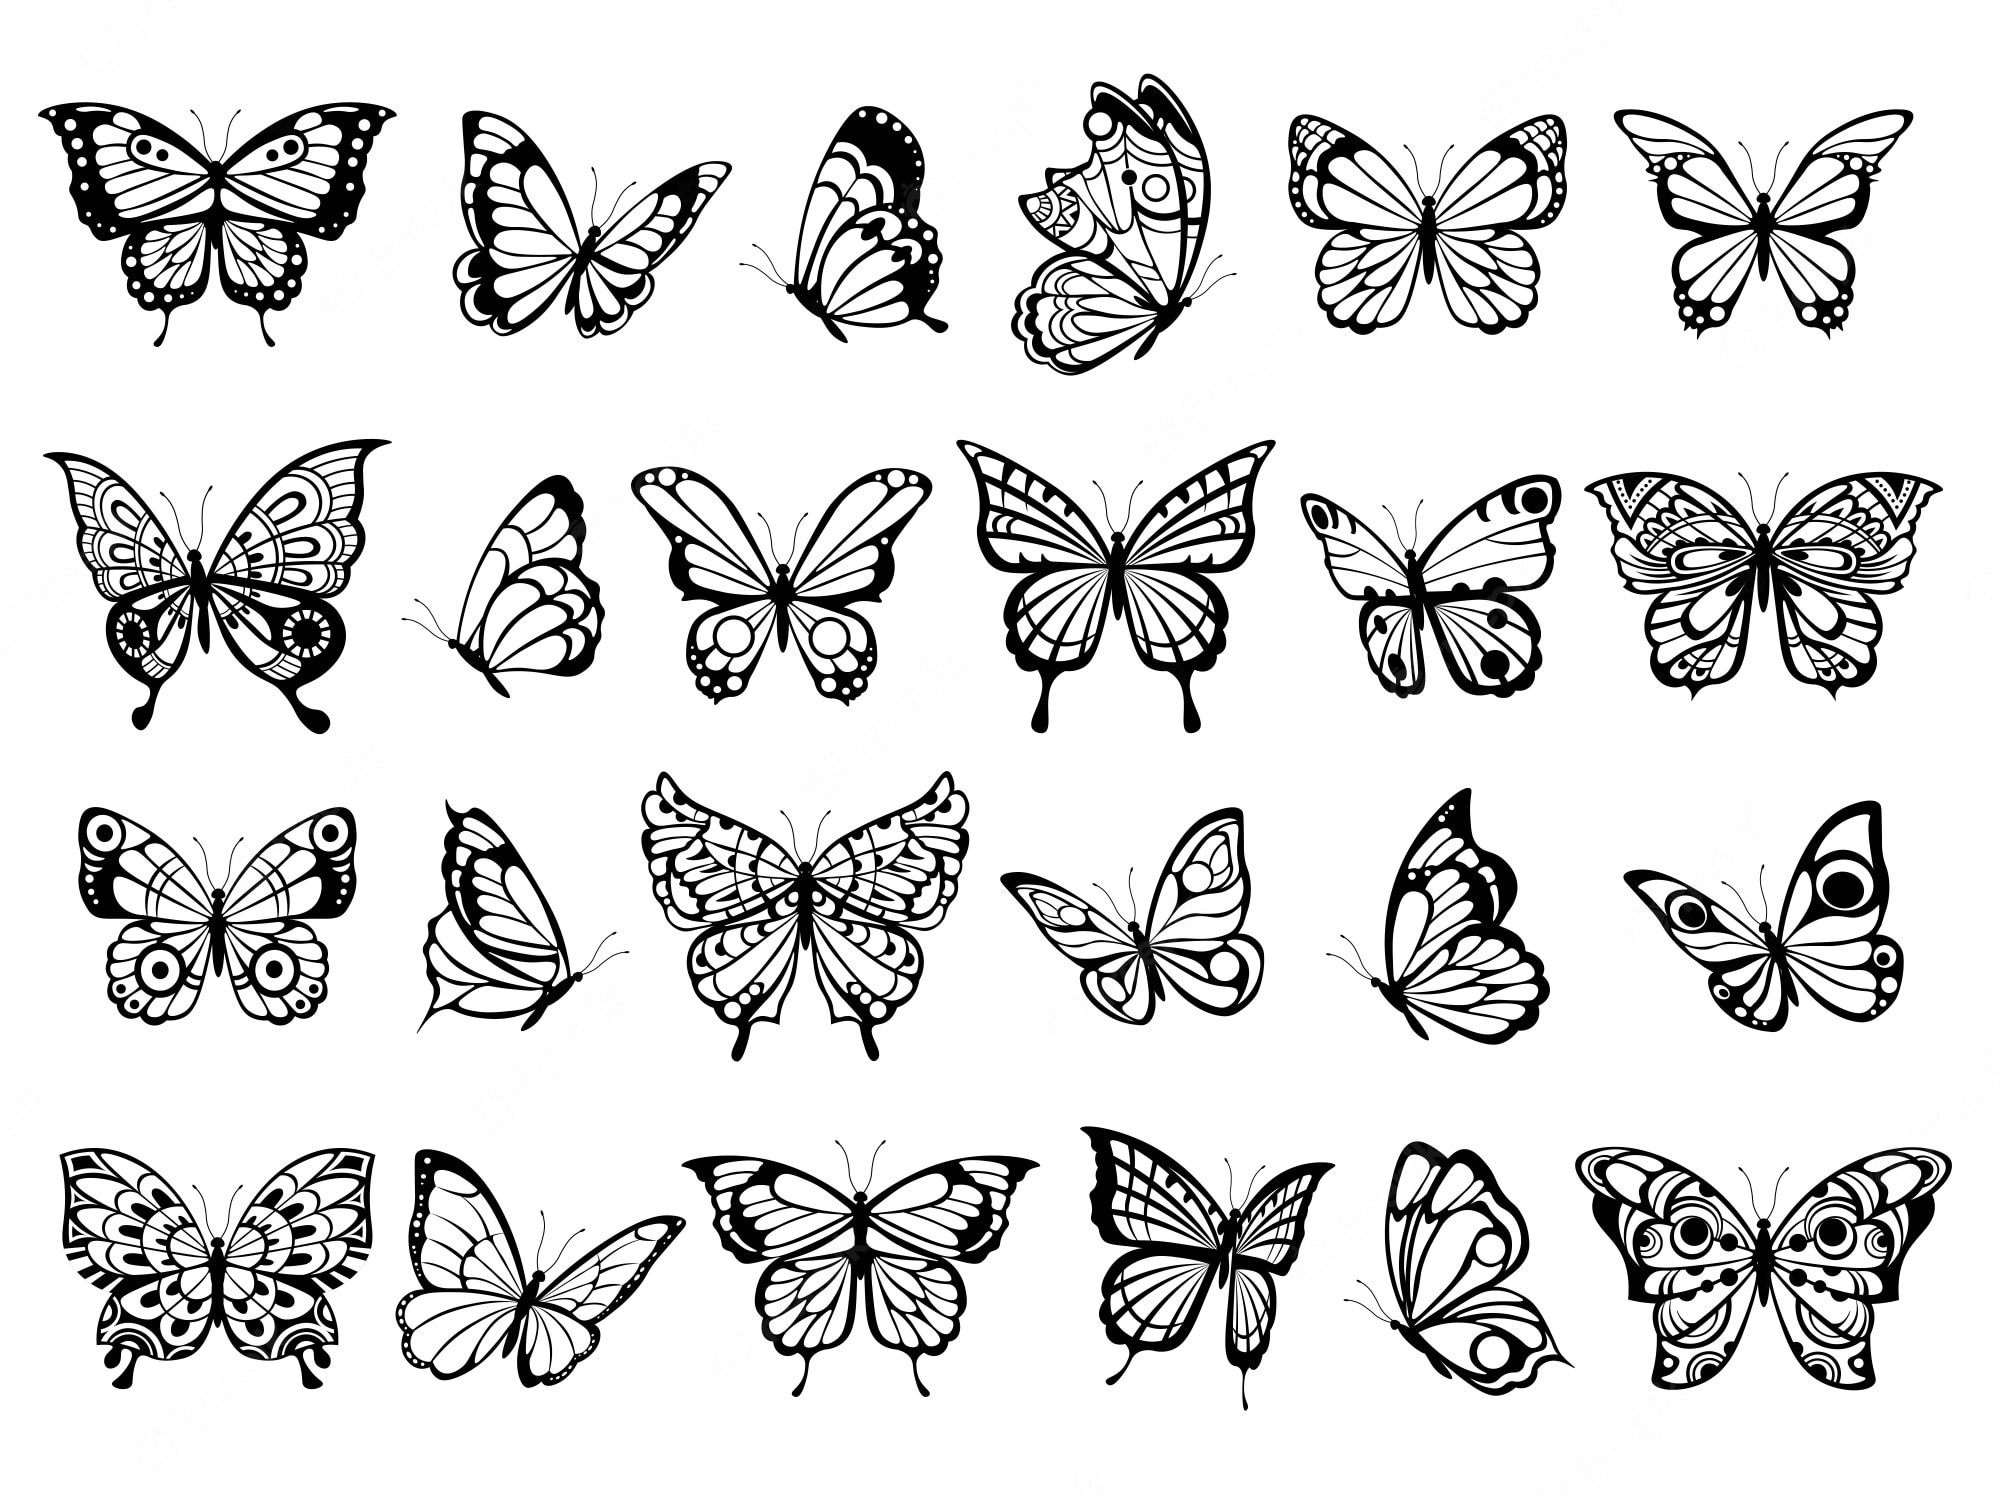 Butterfly Image. Free Vectors, & PSD